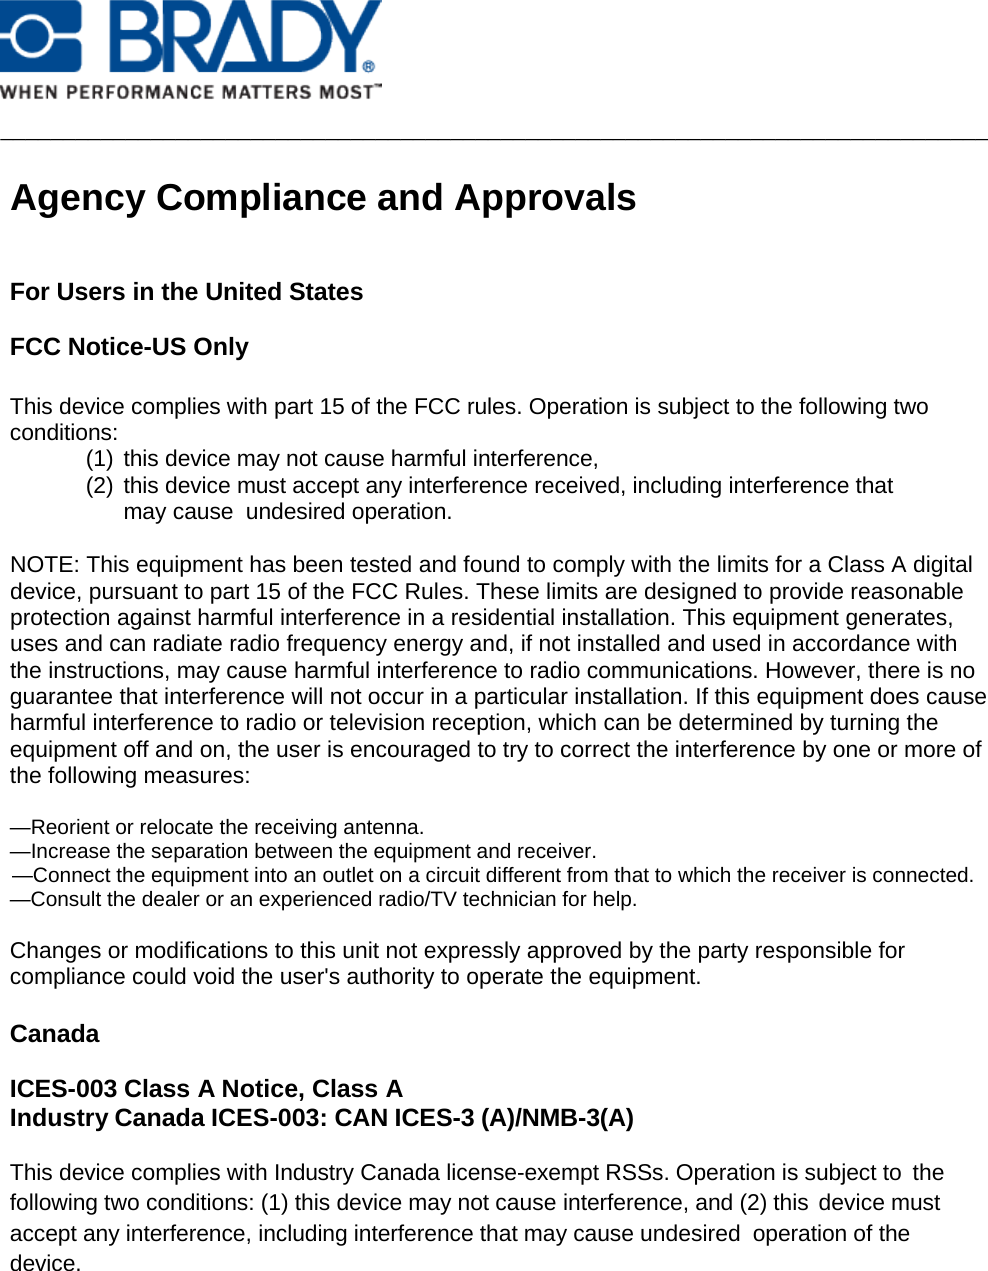    _______________________________________________________________________________   Agency Compliance and Approvals   For Users in the United States FCC Notice-US Only  This device complies with part 15 of the FCC rules. Operation is subject to the following two conditions: (1) this device may not cause harmful interference, (2) this device must accept any interference received, including interference that may cause undesired operation.  NOTE: This equipment has been tested and found to comply with the limits for a Class A digital device, pursuant to part 15 of the FCC Rules. These limits are designed to provide reasonable protection against harmful interference in a residential installation. This equipment generates, uses and can radiate radio frequency energy and, if not installed and used in accordance with the instructions, may cause harmful interference to radio communications. However, there is no guarantee that interference will not occur in a particular installation. If this equipment does cause harmful interference to radio or television reception, which can be determined by turning the equipment off and on, the user is encouraged to try to correct the interference by one or more of the following measures:  —Reorient or relocate the receiving antenna. —Increase the separation between the equipment and receiver.   —Connect the equipment into an outlet on a circuit different from that to which the receiver is connected. —Consult the dealer or an experienced radio/TV technician for help.  Changes or modifications to this unit not expressly approved by the party responsible for compliance could void the user&apos;s authority to operate the equipment.     Canada ICES-003 Class A Notice, Class A Industry Canada ICES-003: CAN ICES-3 (A)/NMB-3(A)  This device complies with Industry Canada license-exempt RSSs. Operation is subject to the following two conditions: (1) this device may not cause interference, and (2) this device must accept any interference, including interference that may cause undesired operation of the device. 